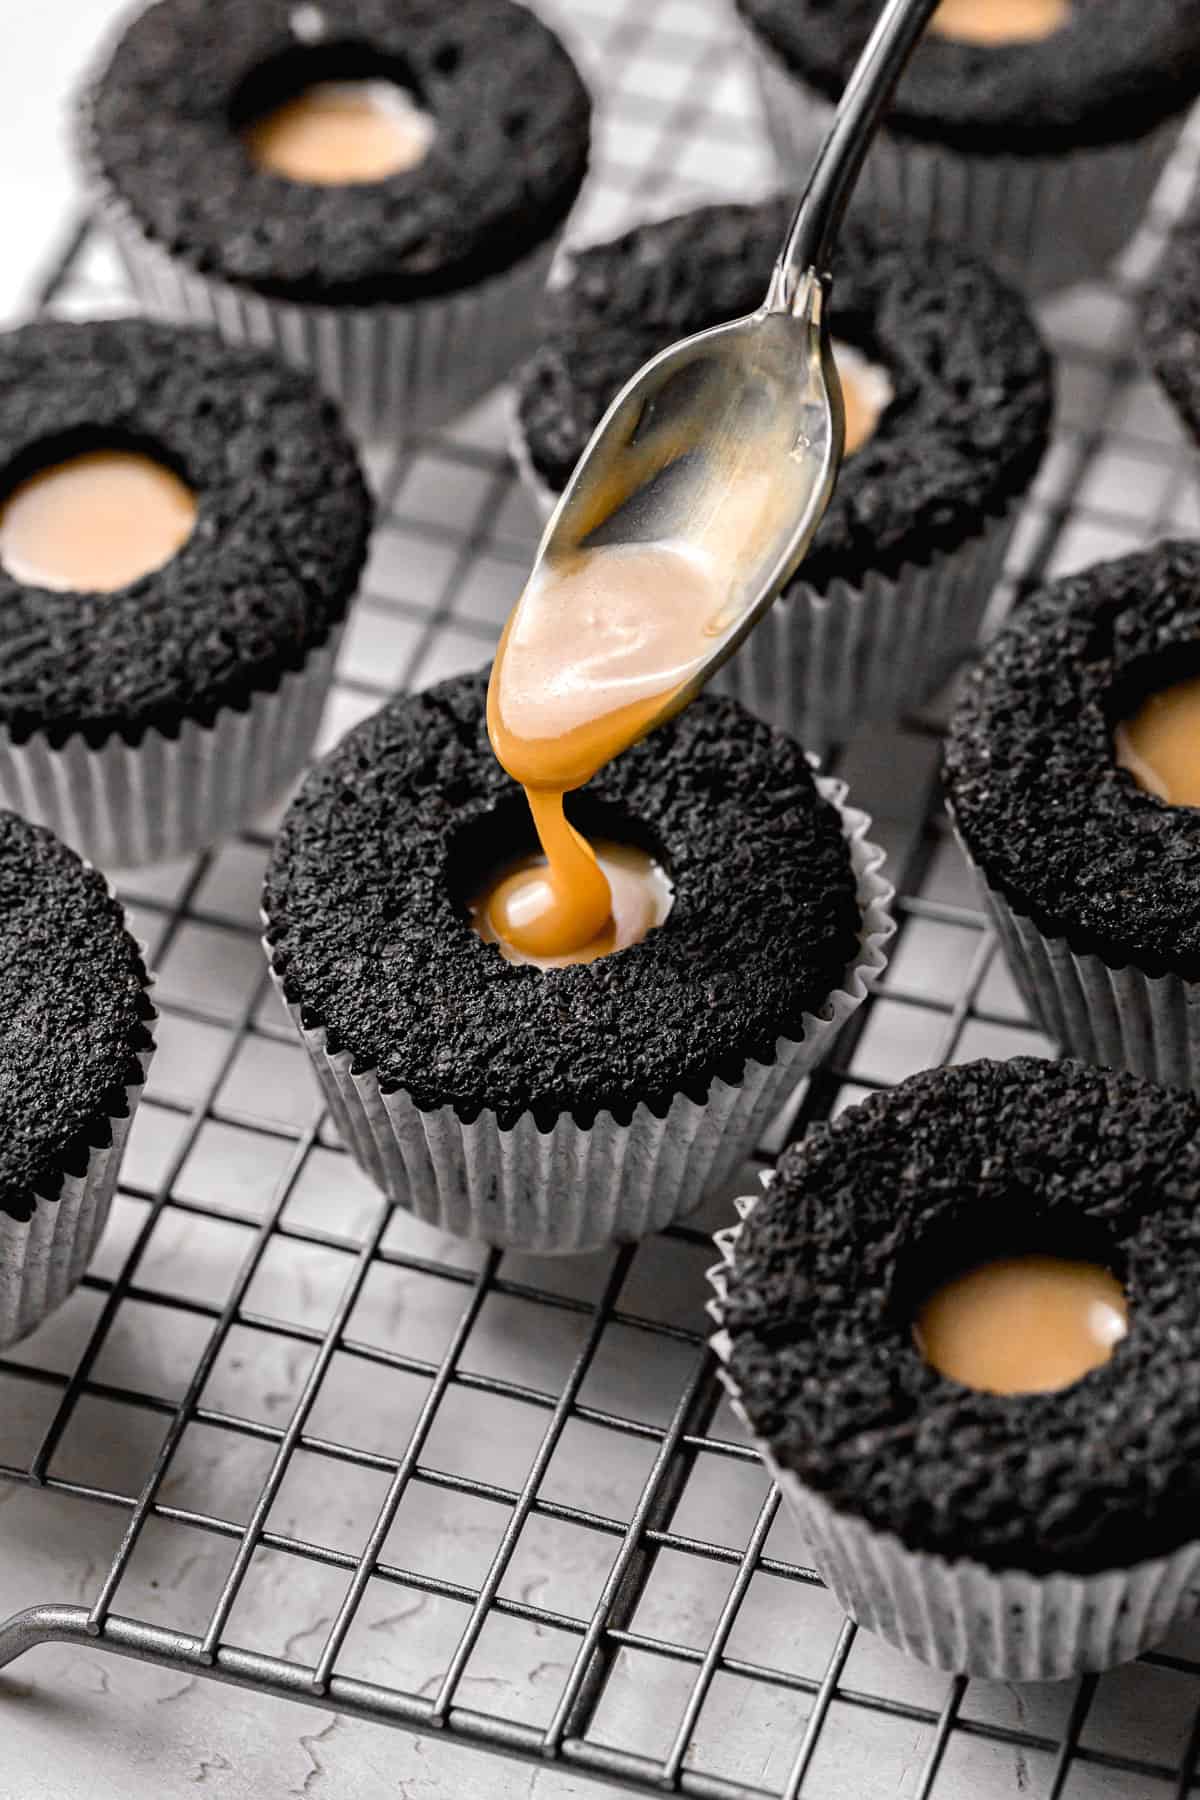 black cocoa cupcakes being filled with caramel sauce